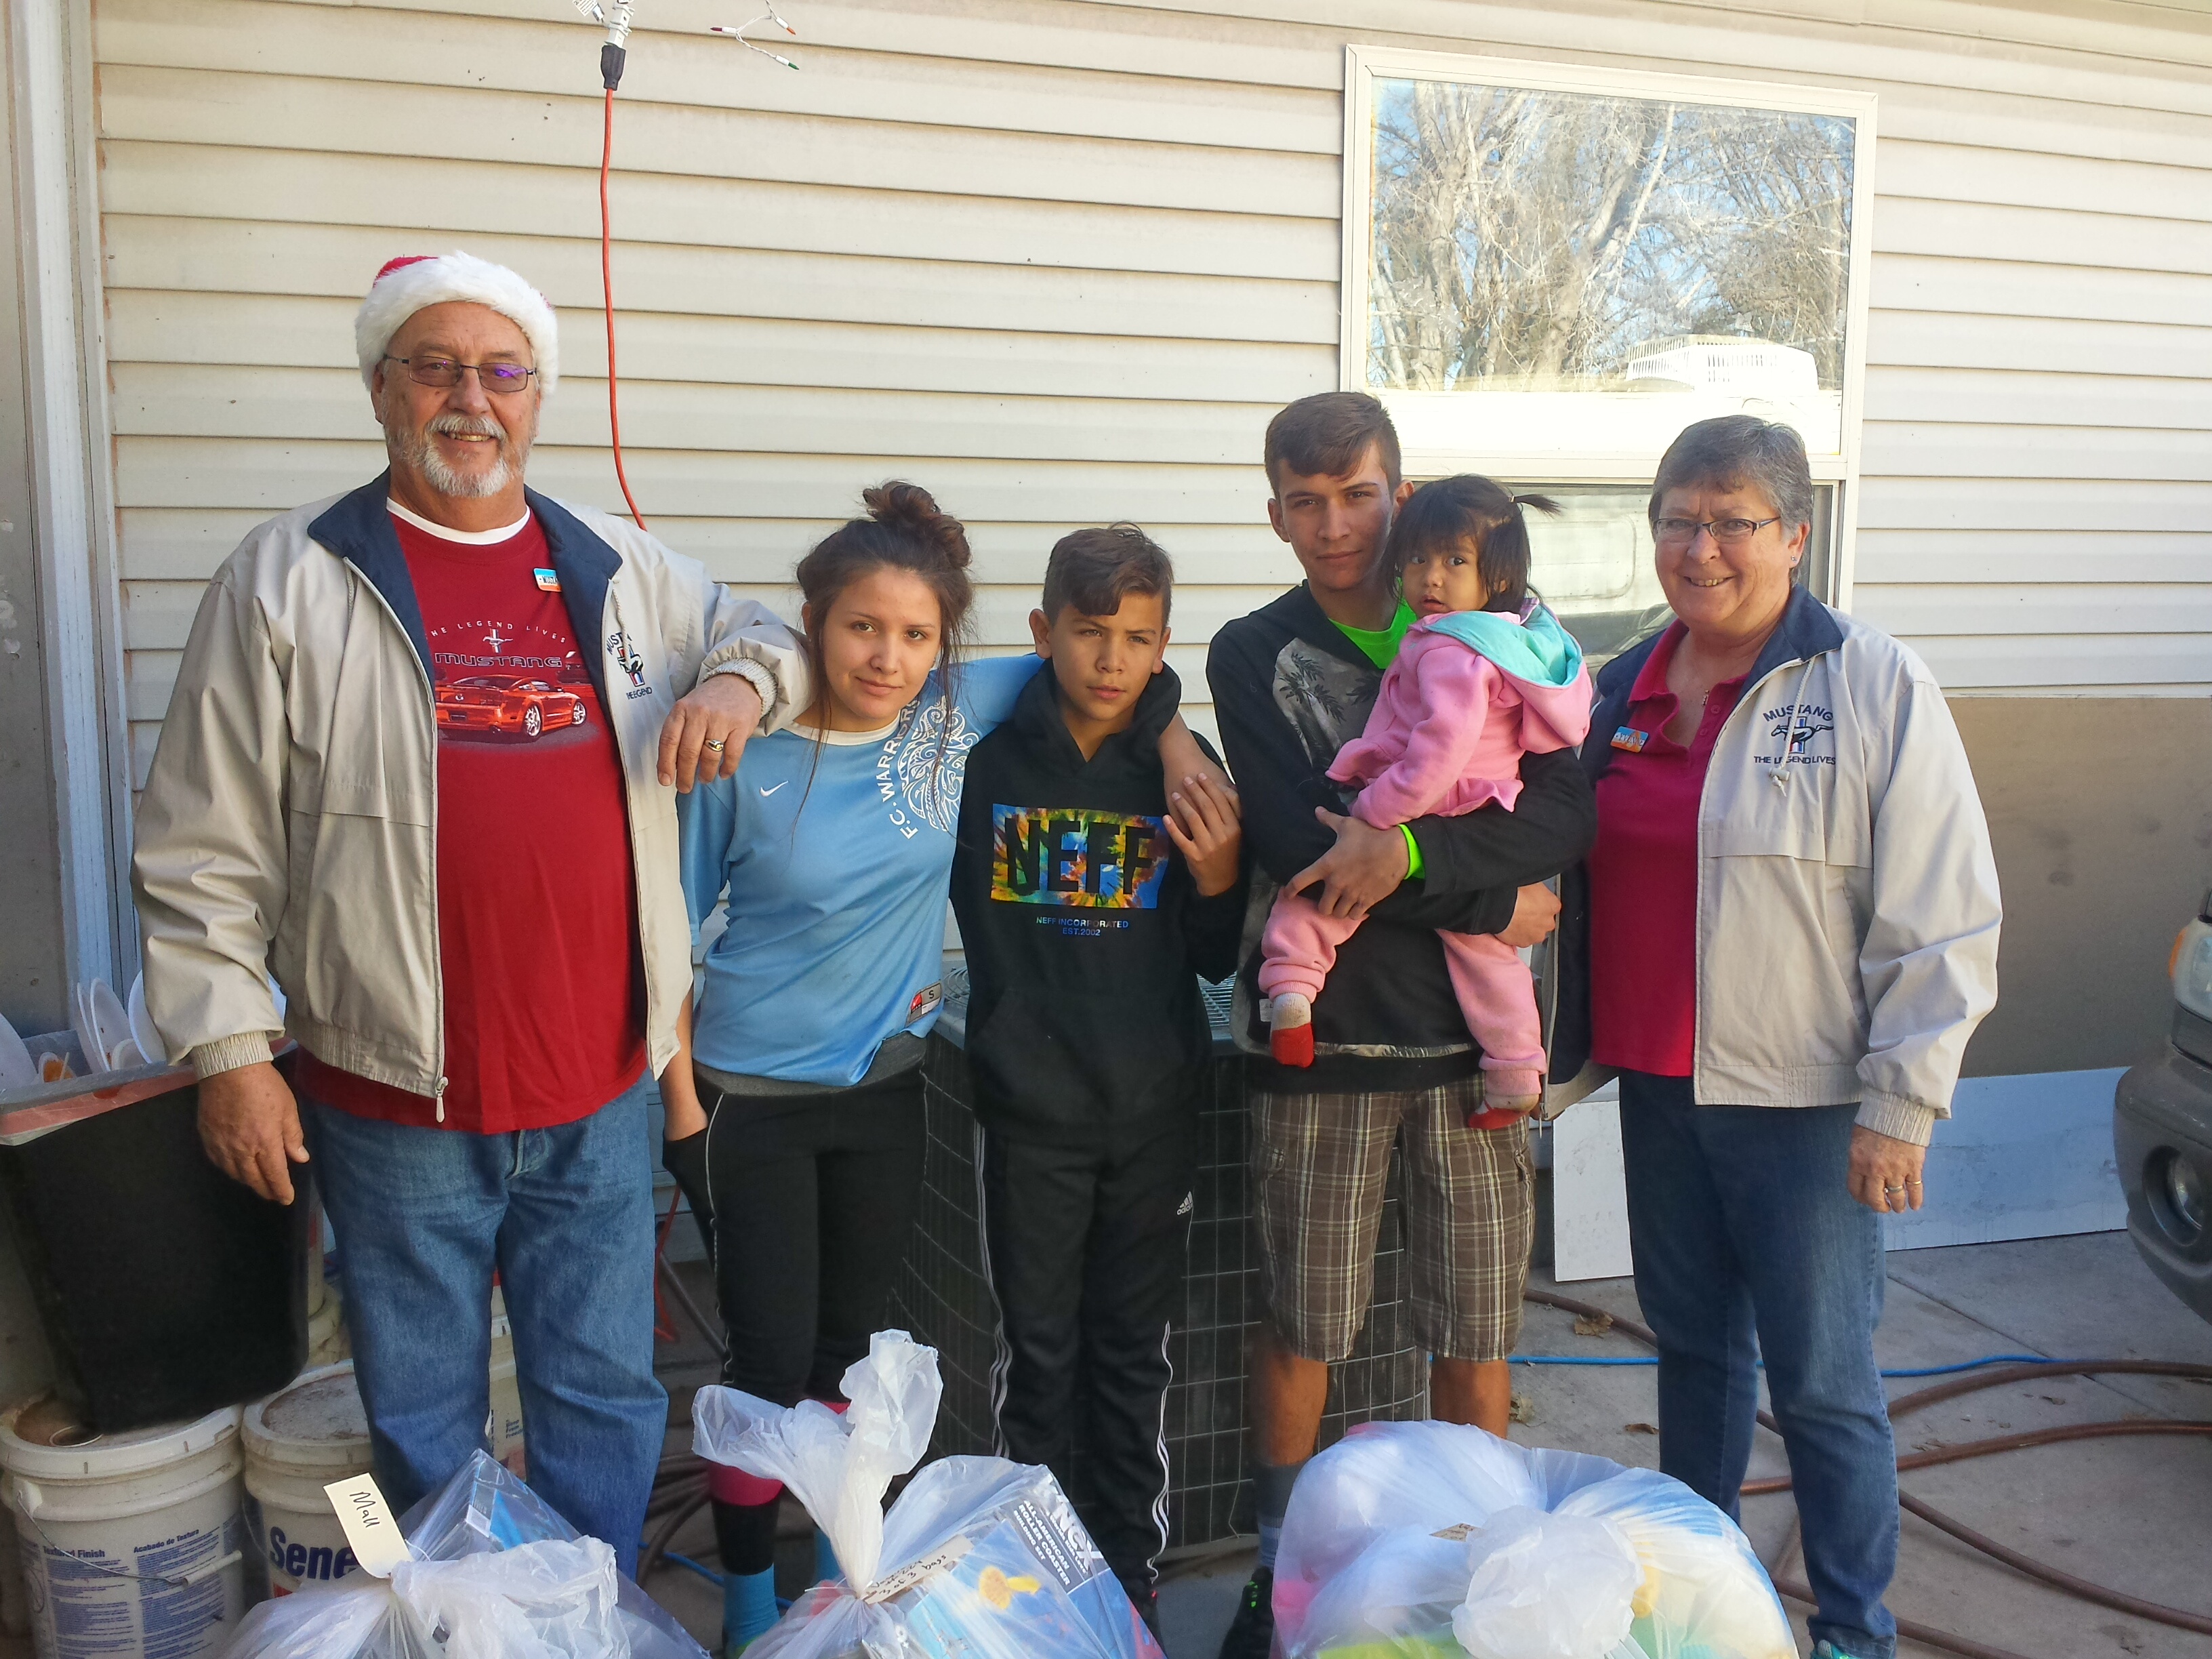 This family received a delivery of Christmas toys from Toys for Tots, St. George, Utah, Dec. 19, 2015 | Photo courtesy of Shane Dastrup, St. George News